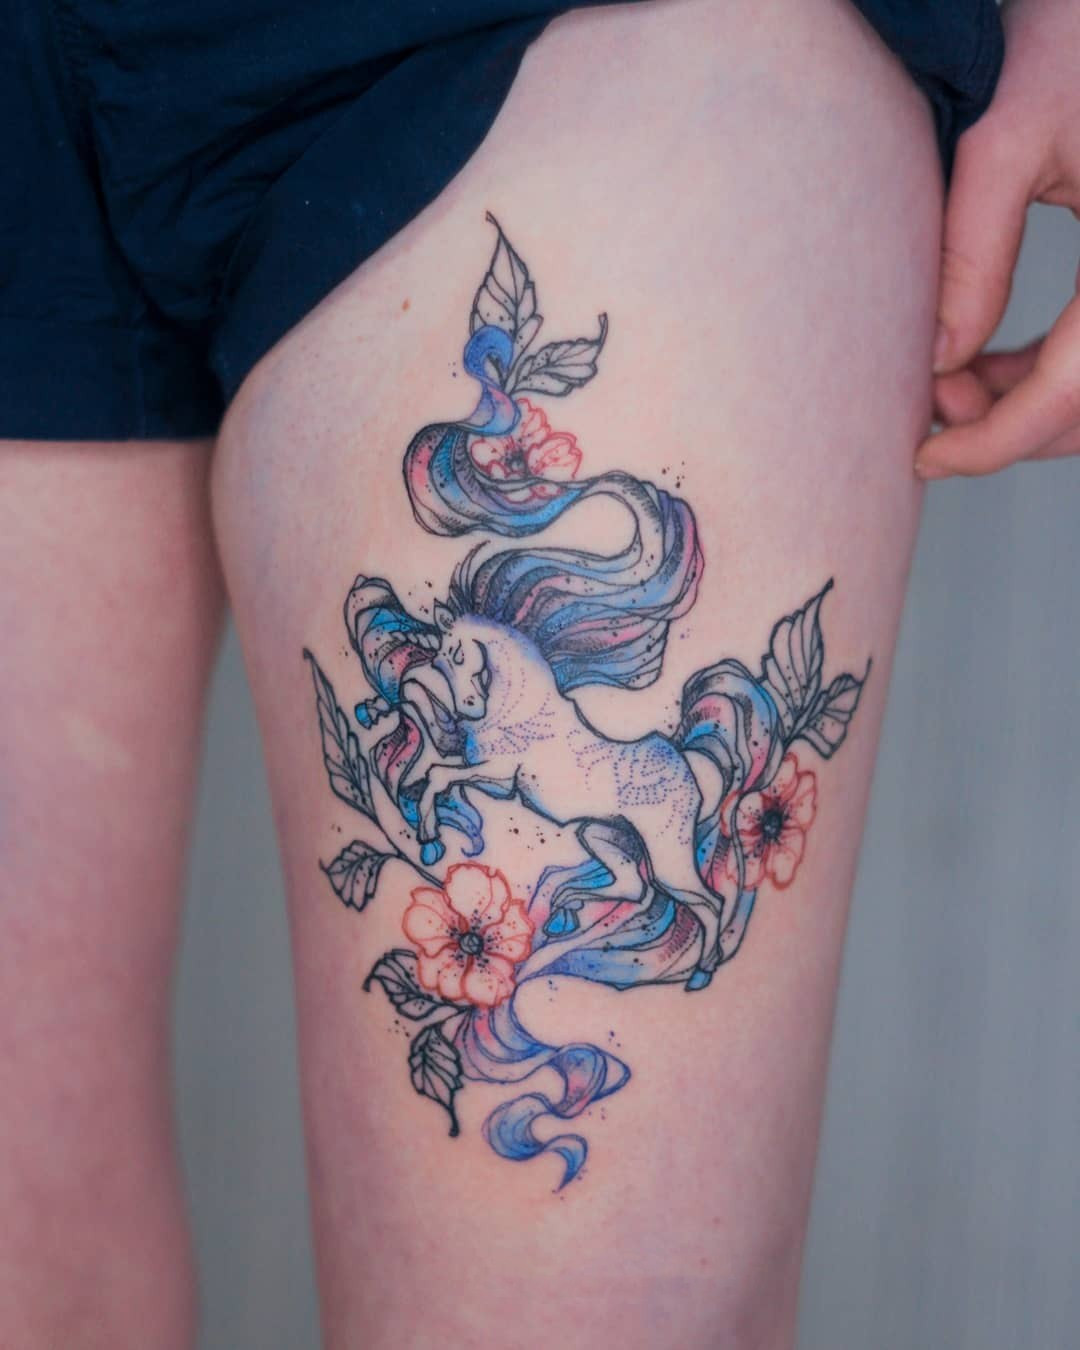 52 Intriguing Unicorn Tattoos Designs,Unicorn tattoo designs are whimsical and happy. The evoke a sense of euphoria that's enchanting and enticing to both the artist, the canvas and the onlooker.